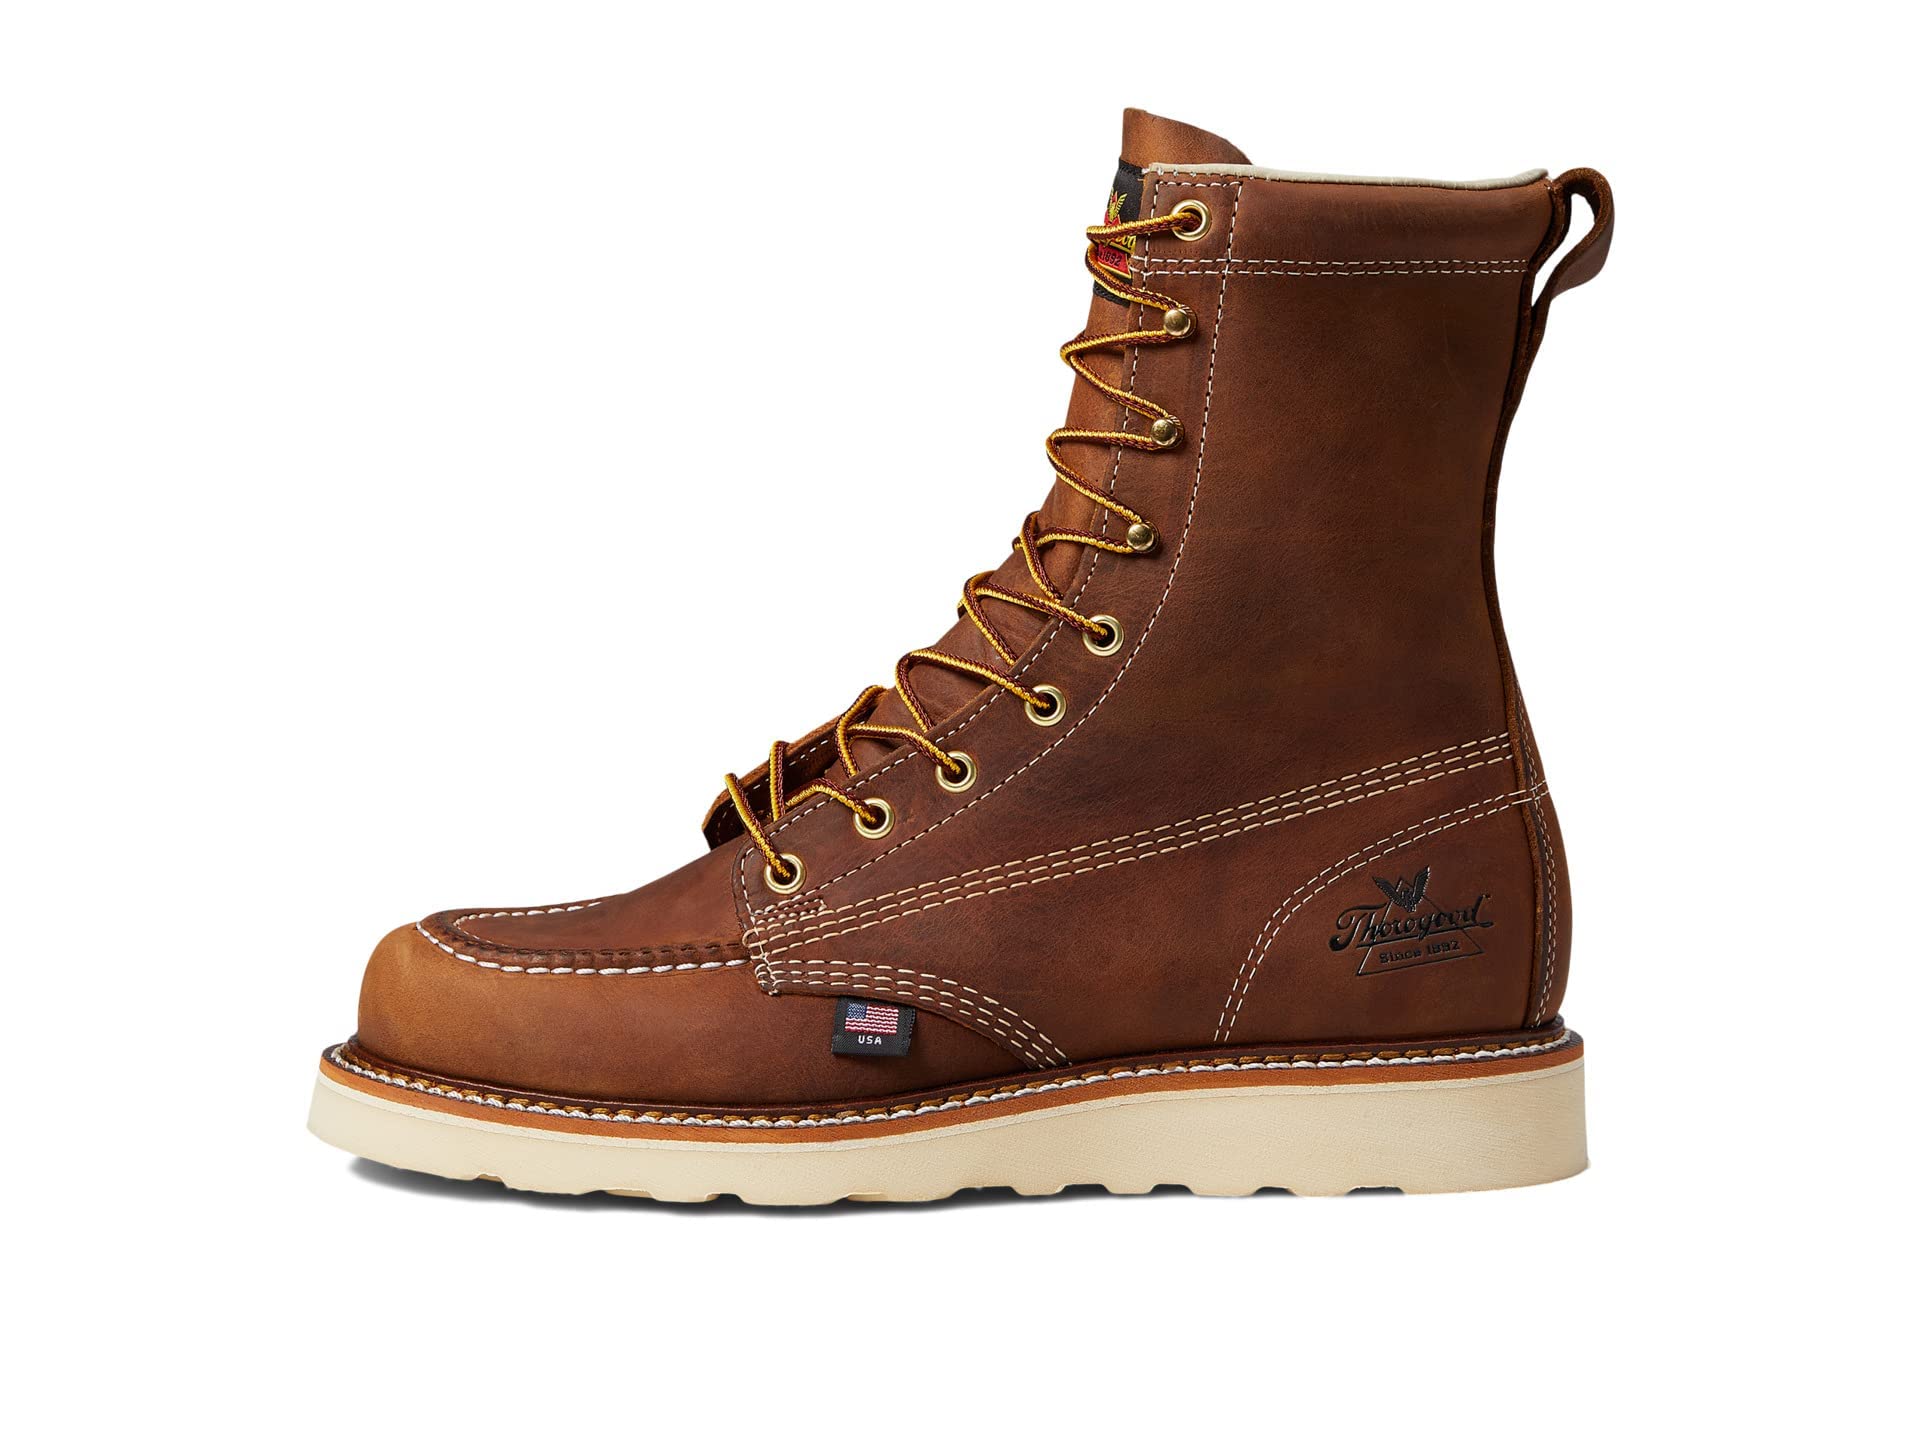 Thorogood American Heritage 8” Moc Toe Work Boots For Men Breathable Leather Boots With Slip-Resistant MAXWear Wedge Outsole and Goodyear Storm Welt